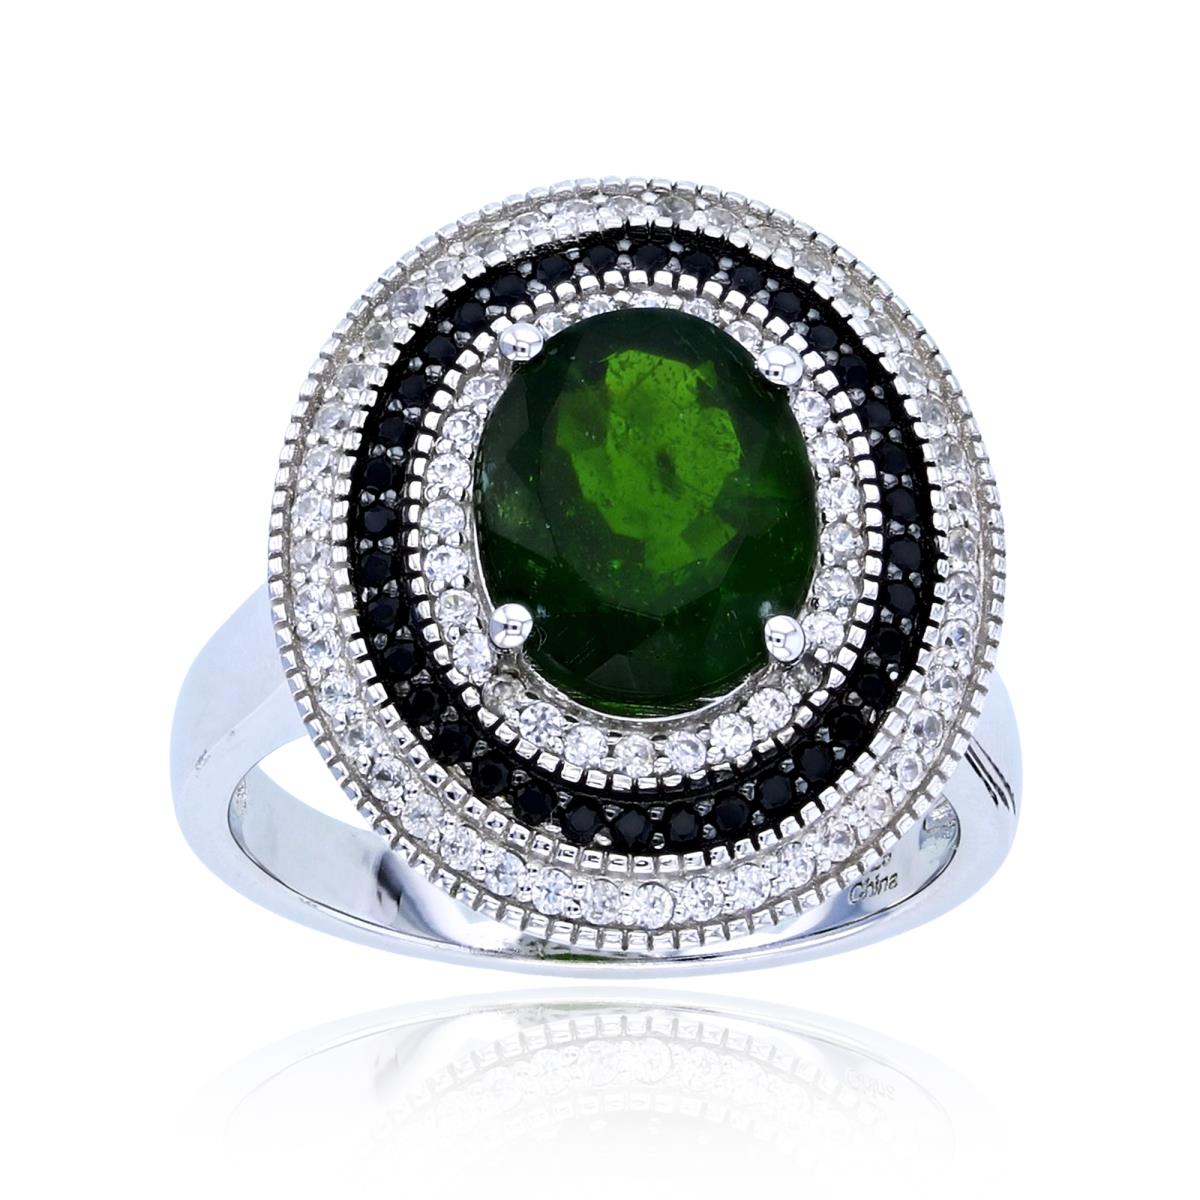 Sterling Silver Two-Tone (Blk/Wh) 10x8mm Ov Chrom Diopside & Rnd White Zircon / Black Spinel Triple Halo Ring